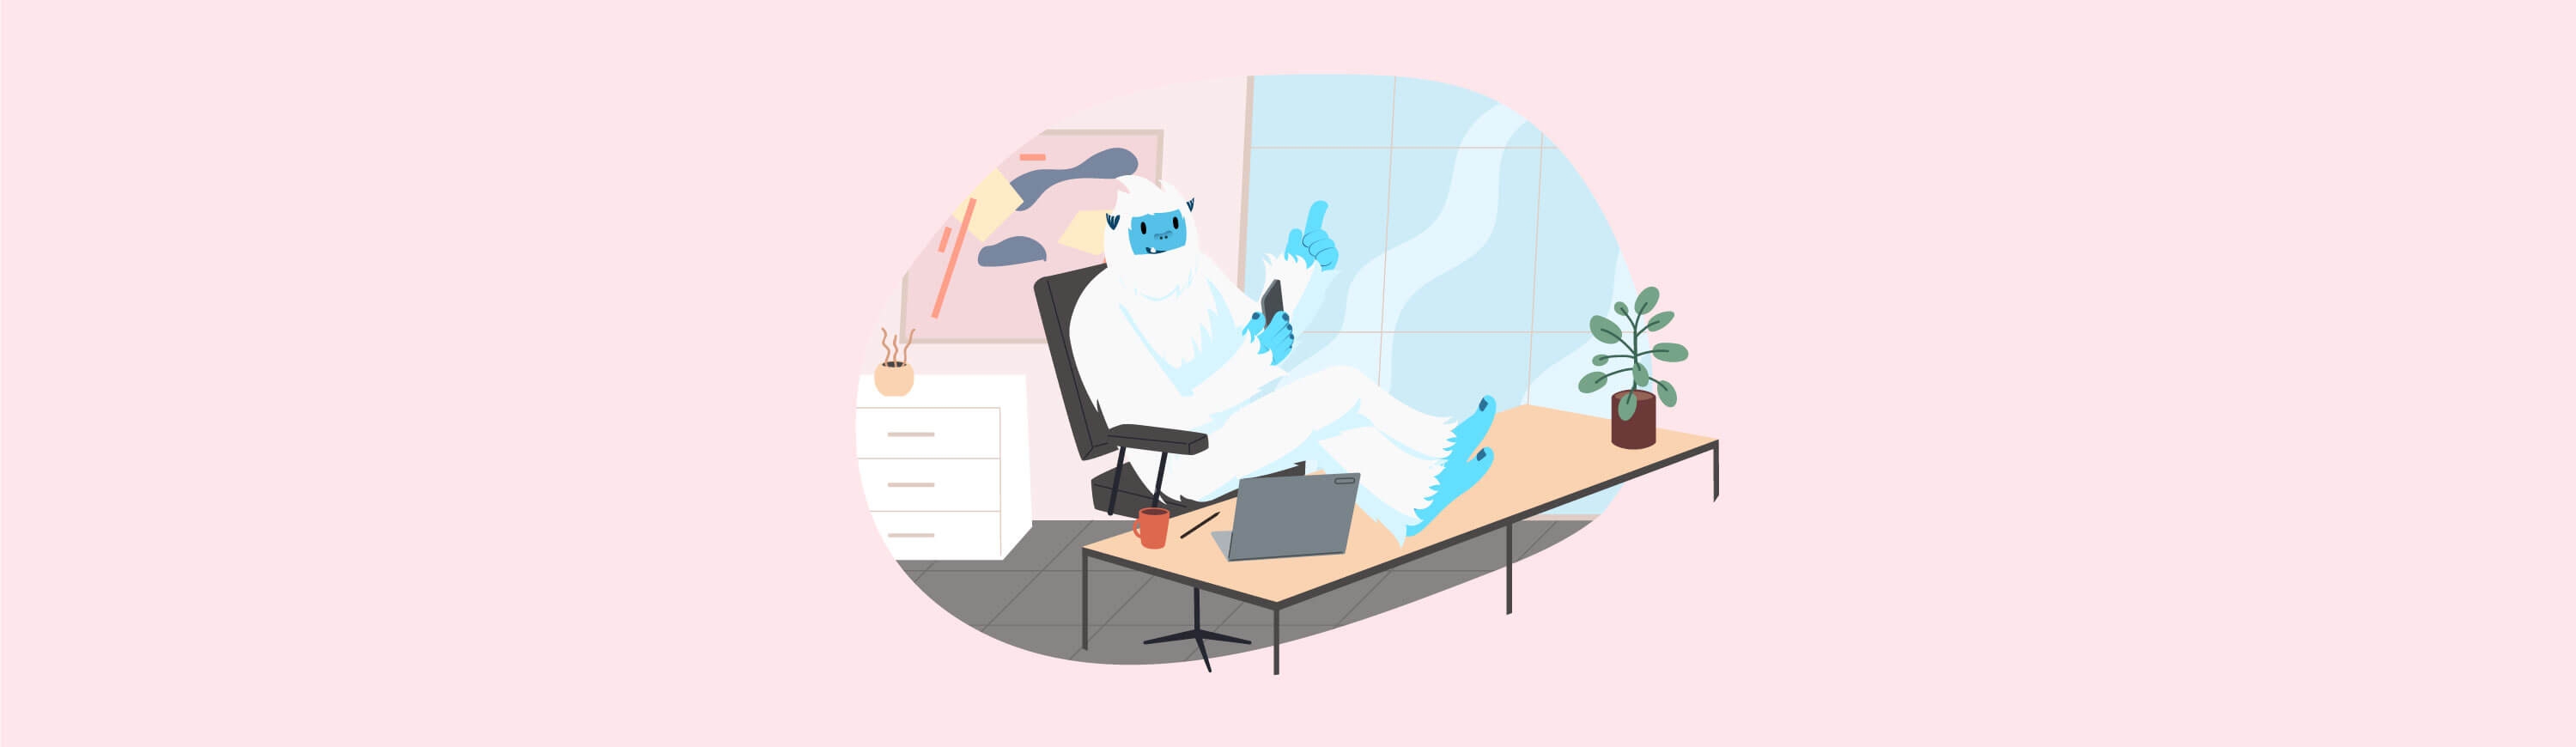 Illustration of Carl the yeti smiling with his feet on a desk with his cell phone.